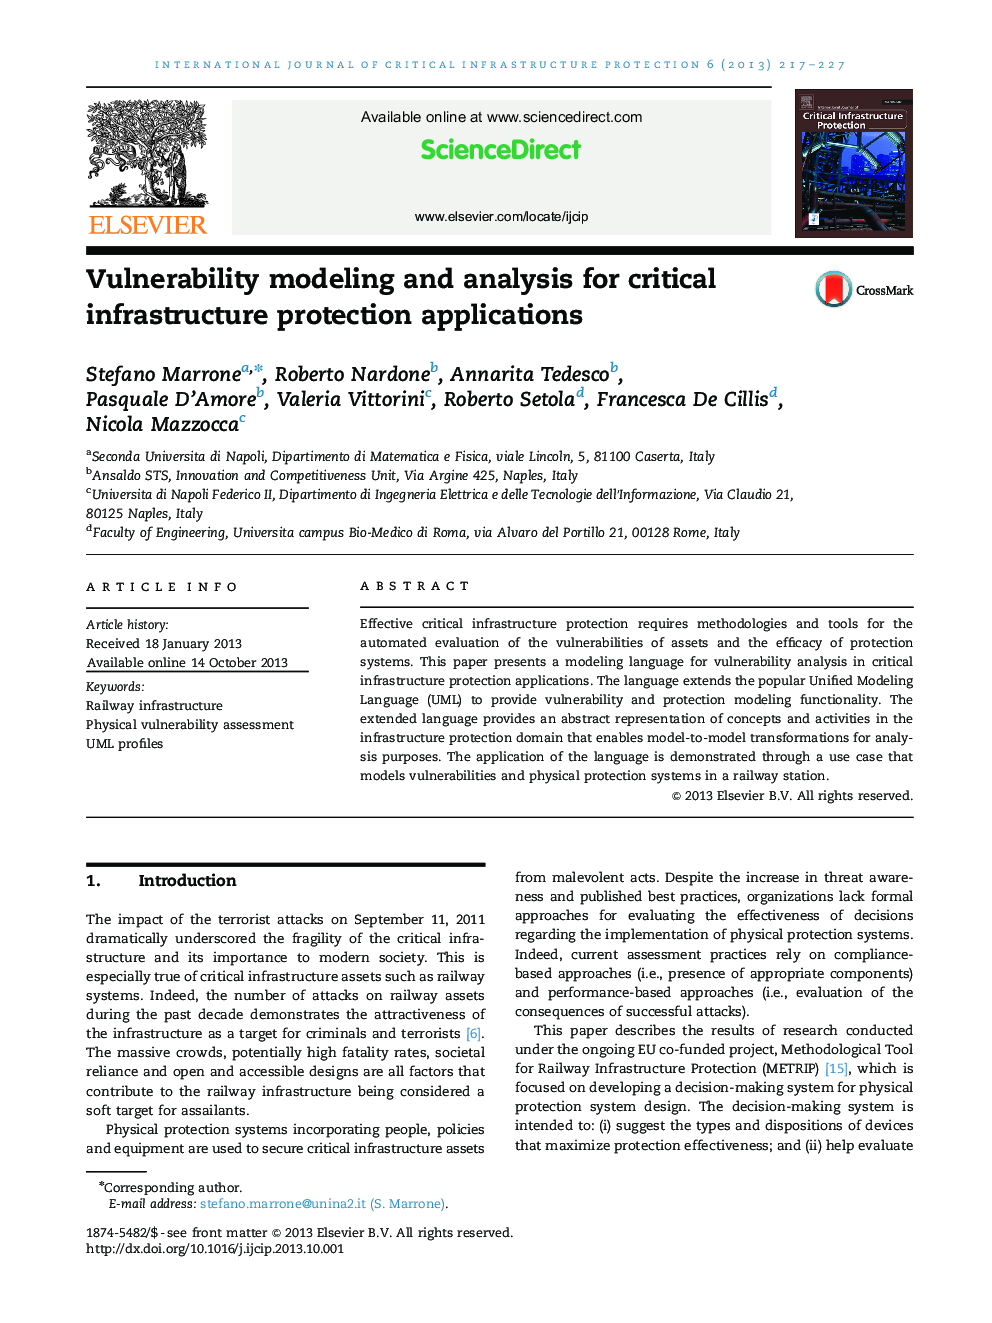 Vulnerability modeling and analysis for critical infrastructure protection applications